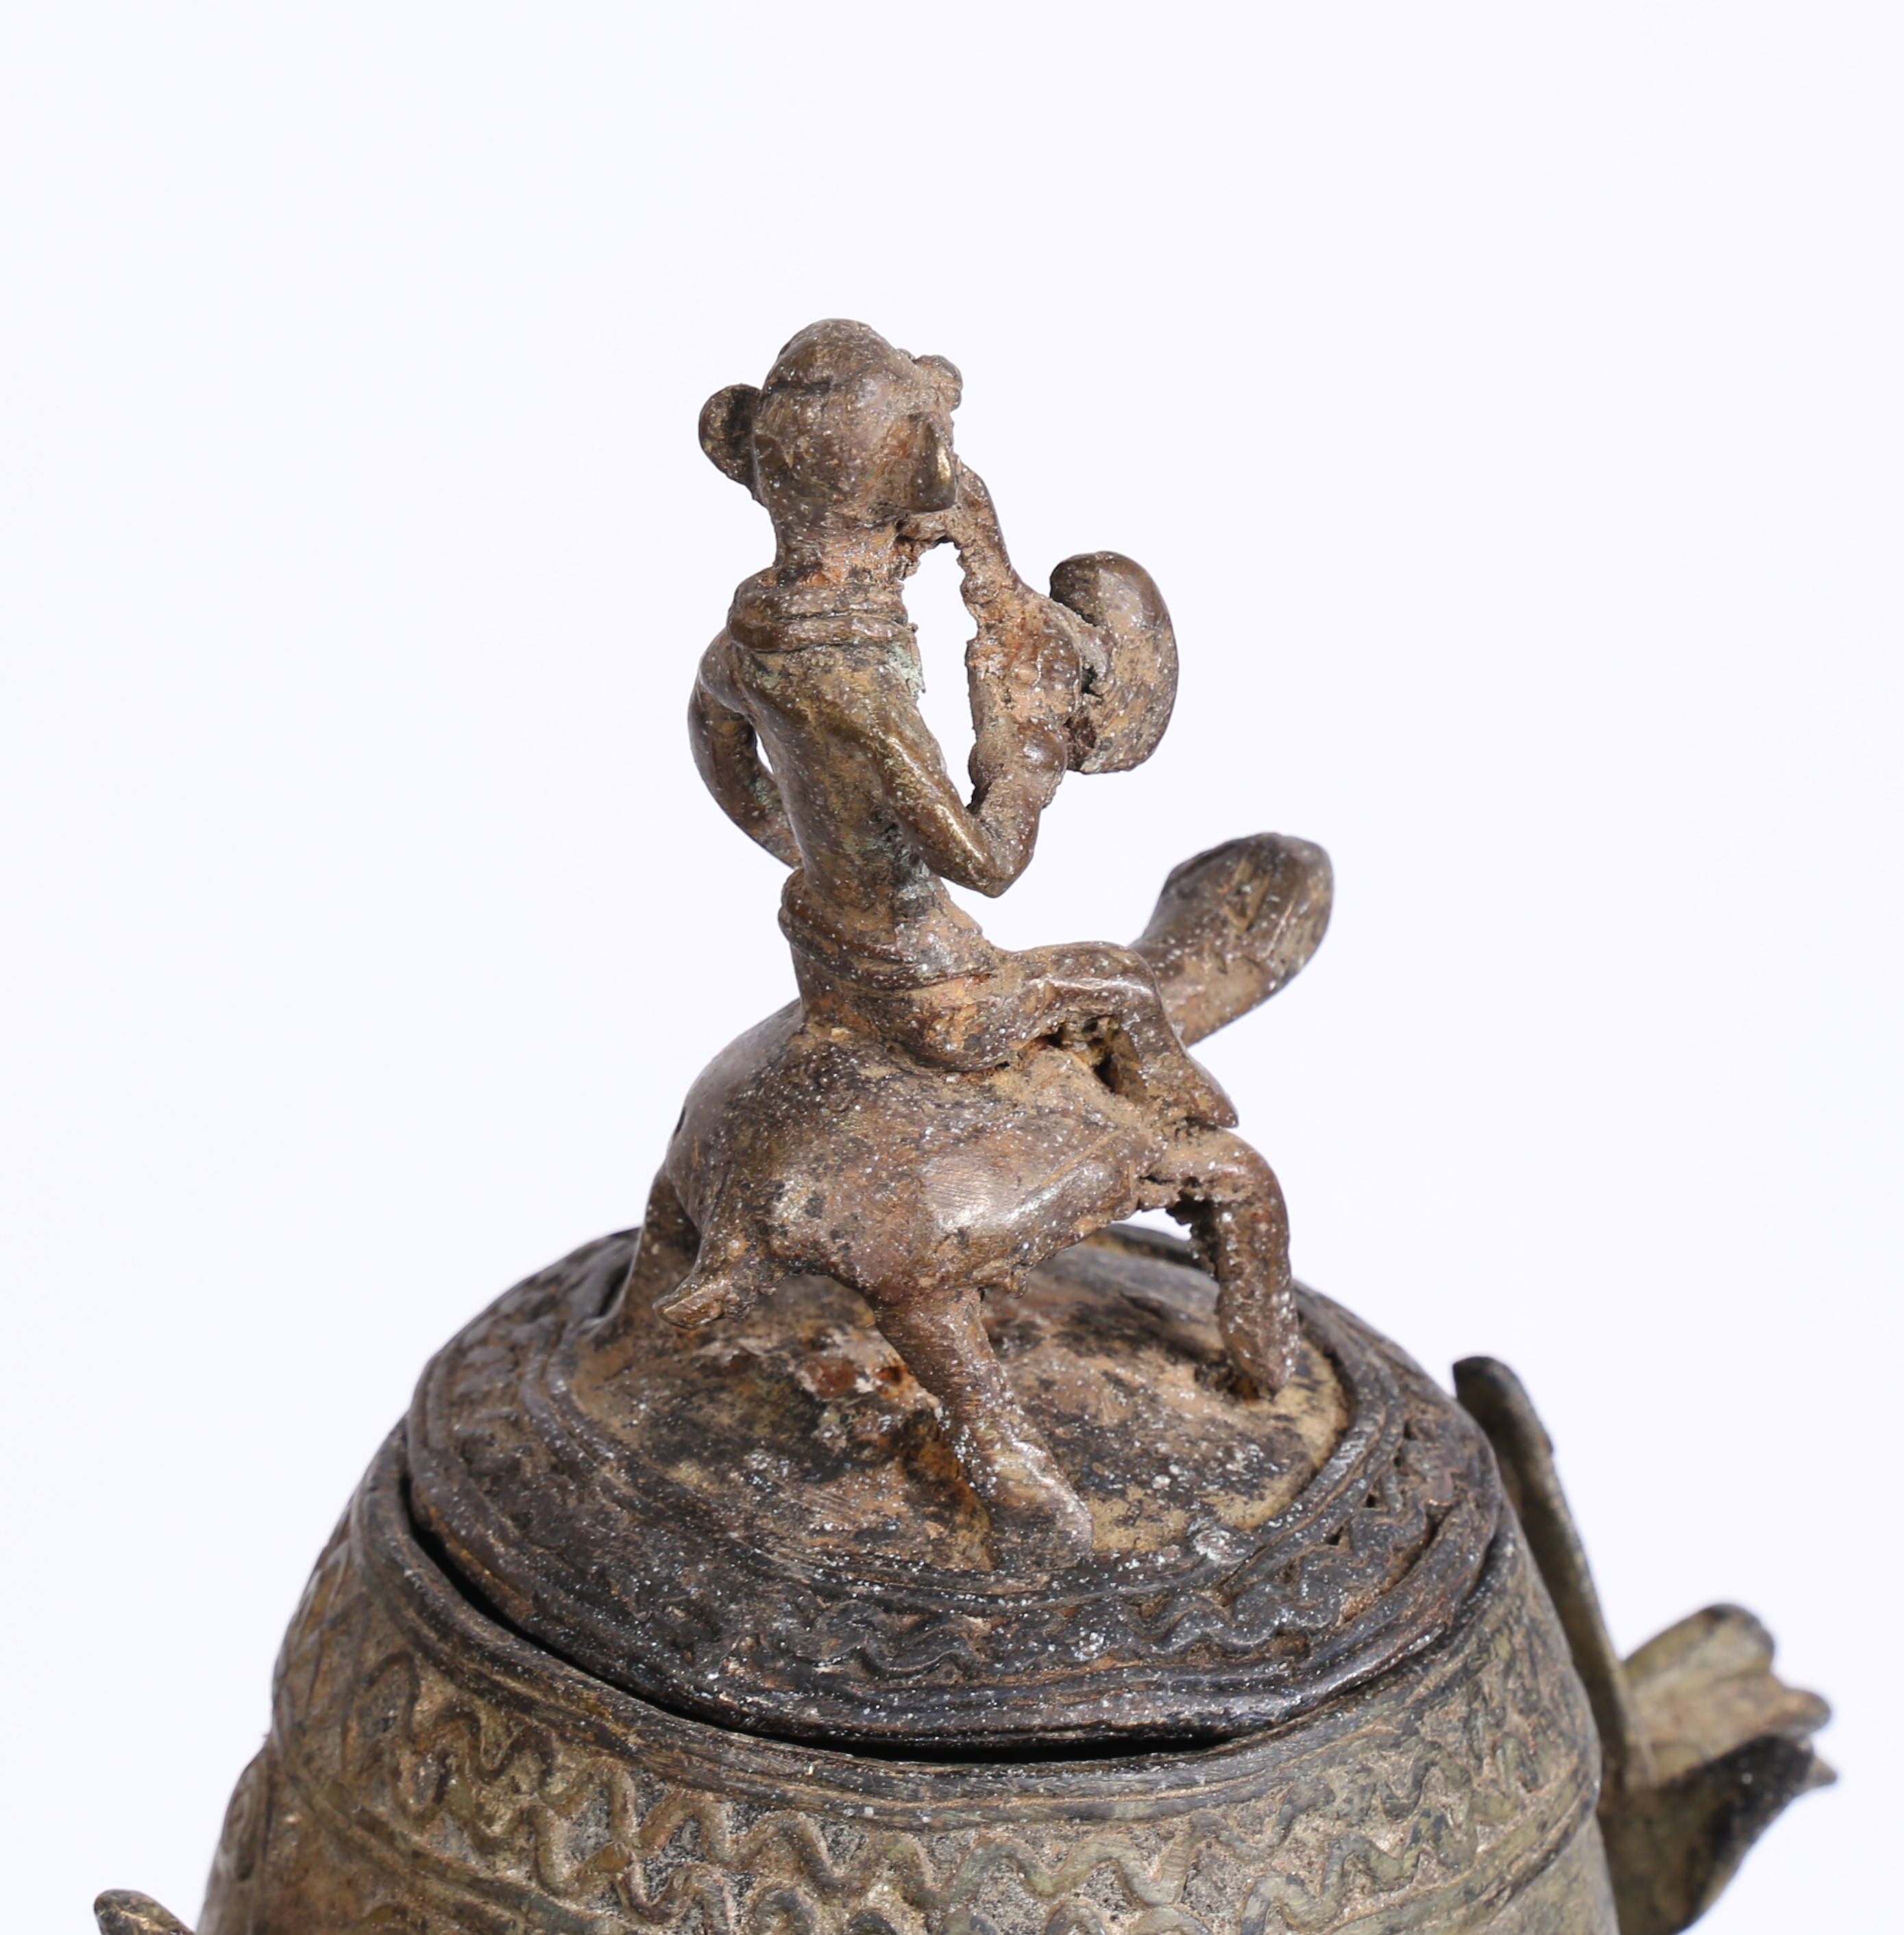 A DOGON BRONZED MEDICINE CONTAINER CARRIED BY TWO HORSES, MALI. - Image 7 of 8